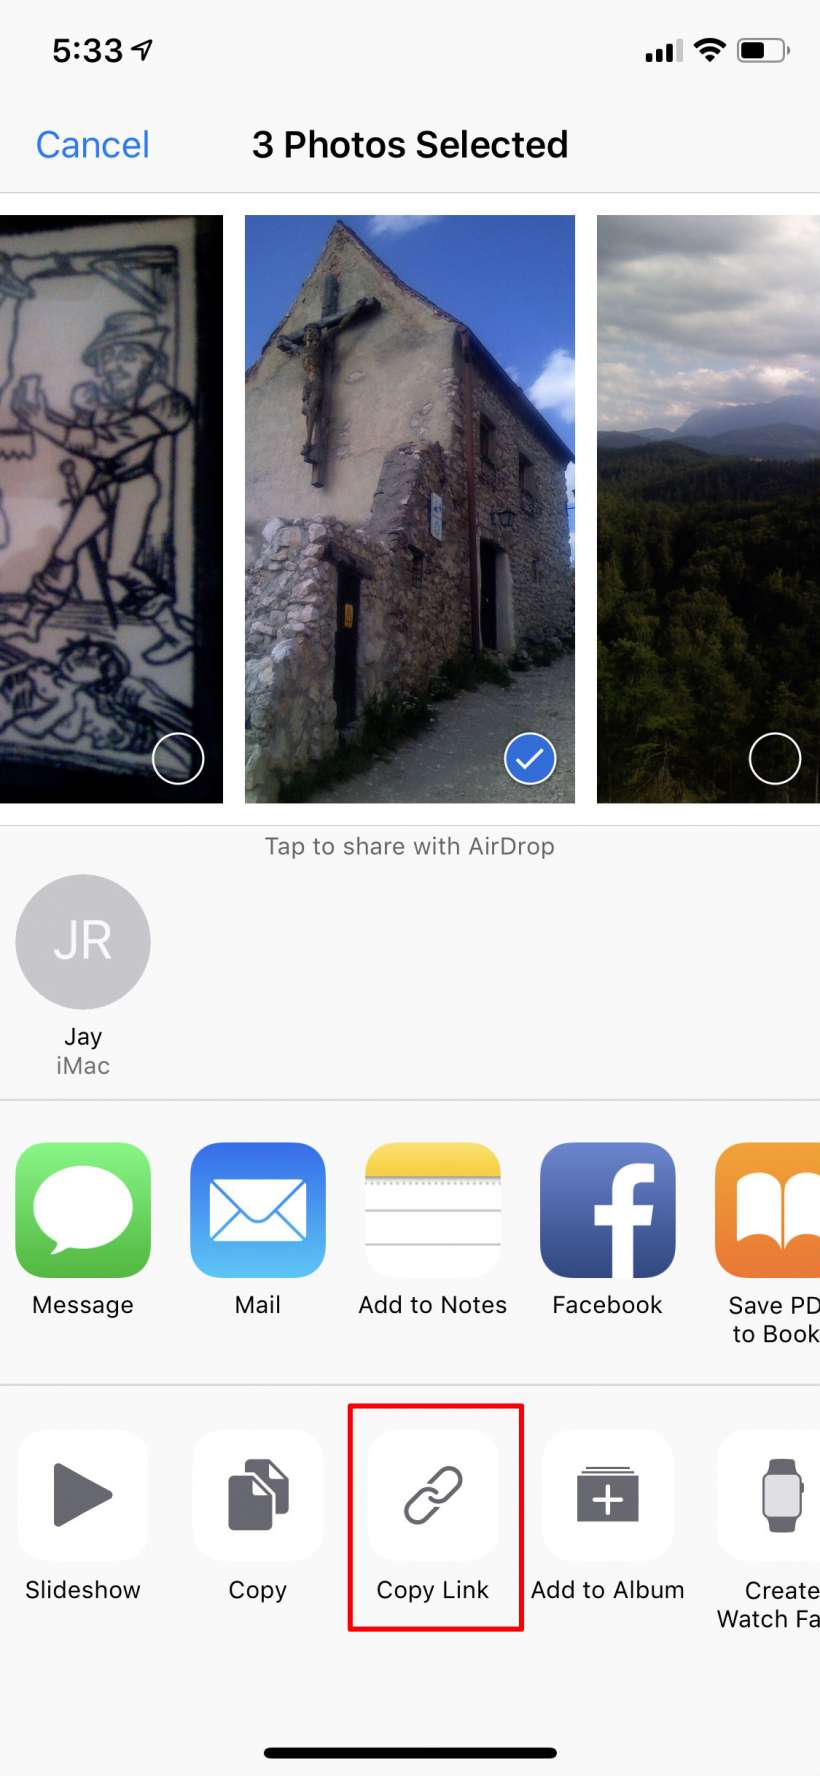 How to send links to your iCloud photos on iPhone and iPad.